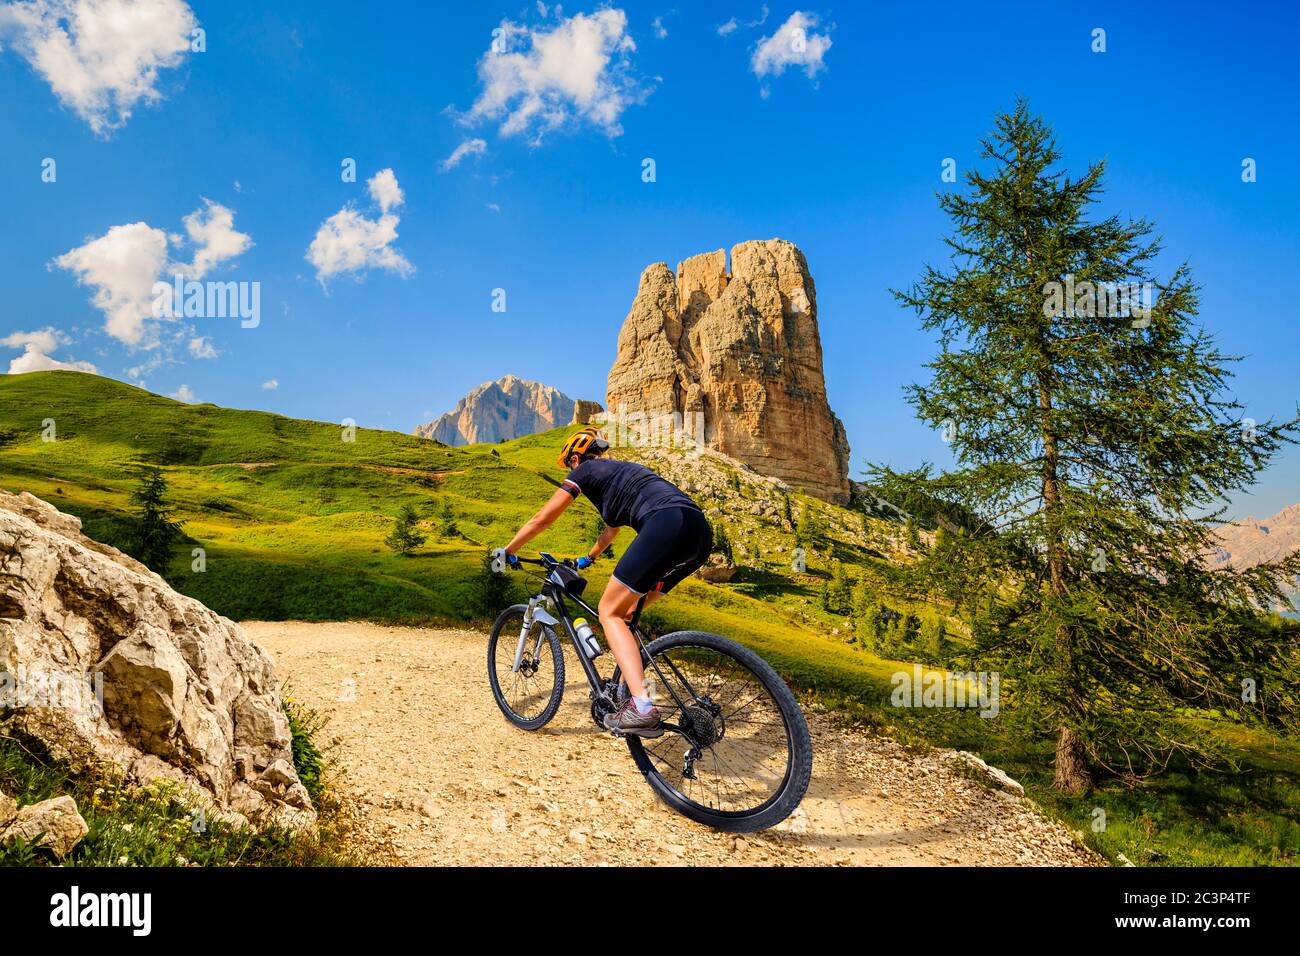 Woman cycling in Cortina d'Ampezzo, stunning Cinque Torri and Tofana in background. Woman riding MTB trail. South Tyrol province of Italy, Dolomites. Stock Photo